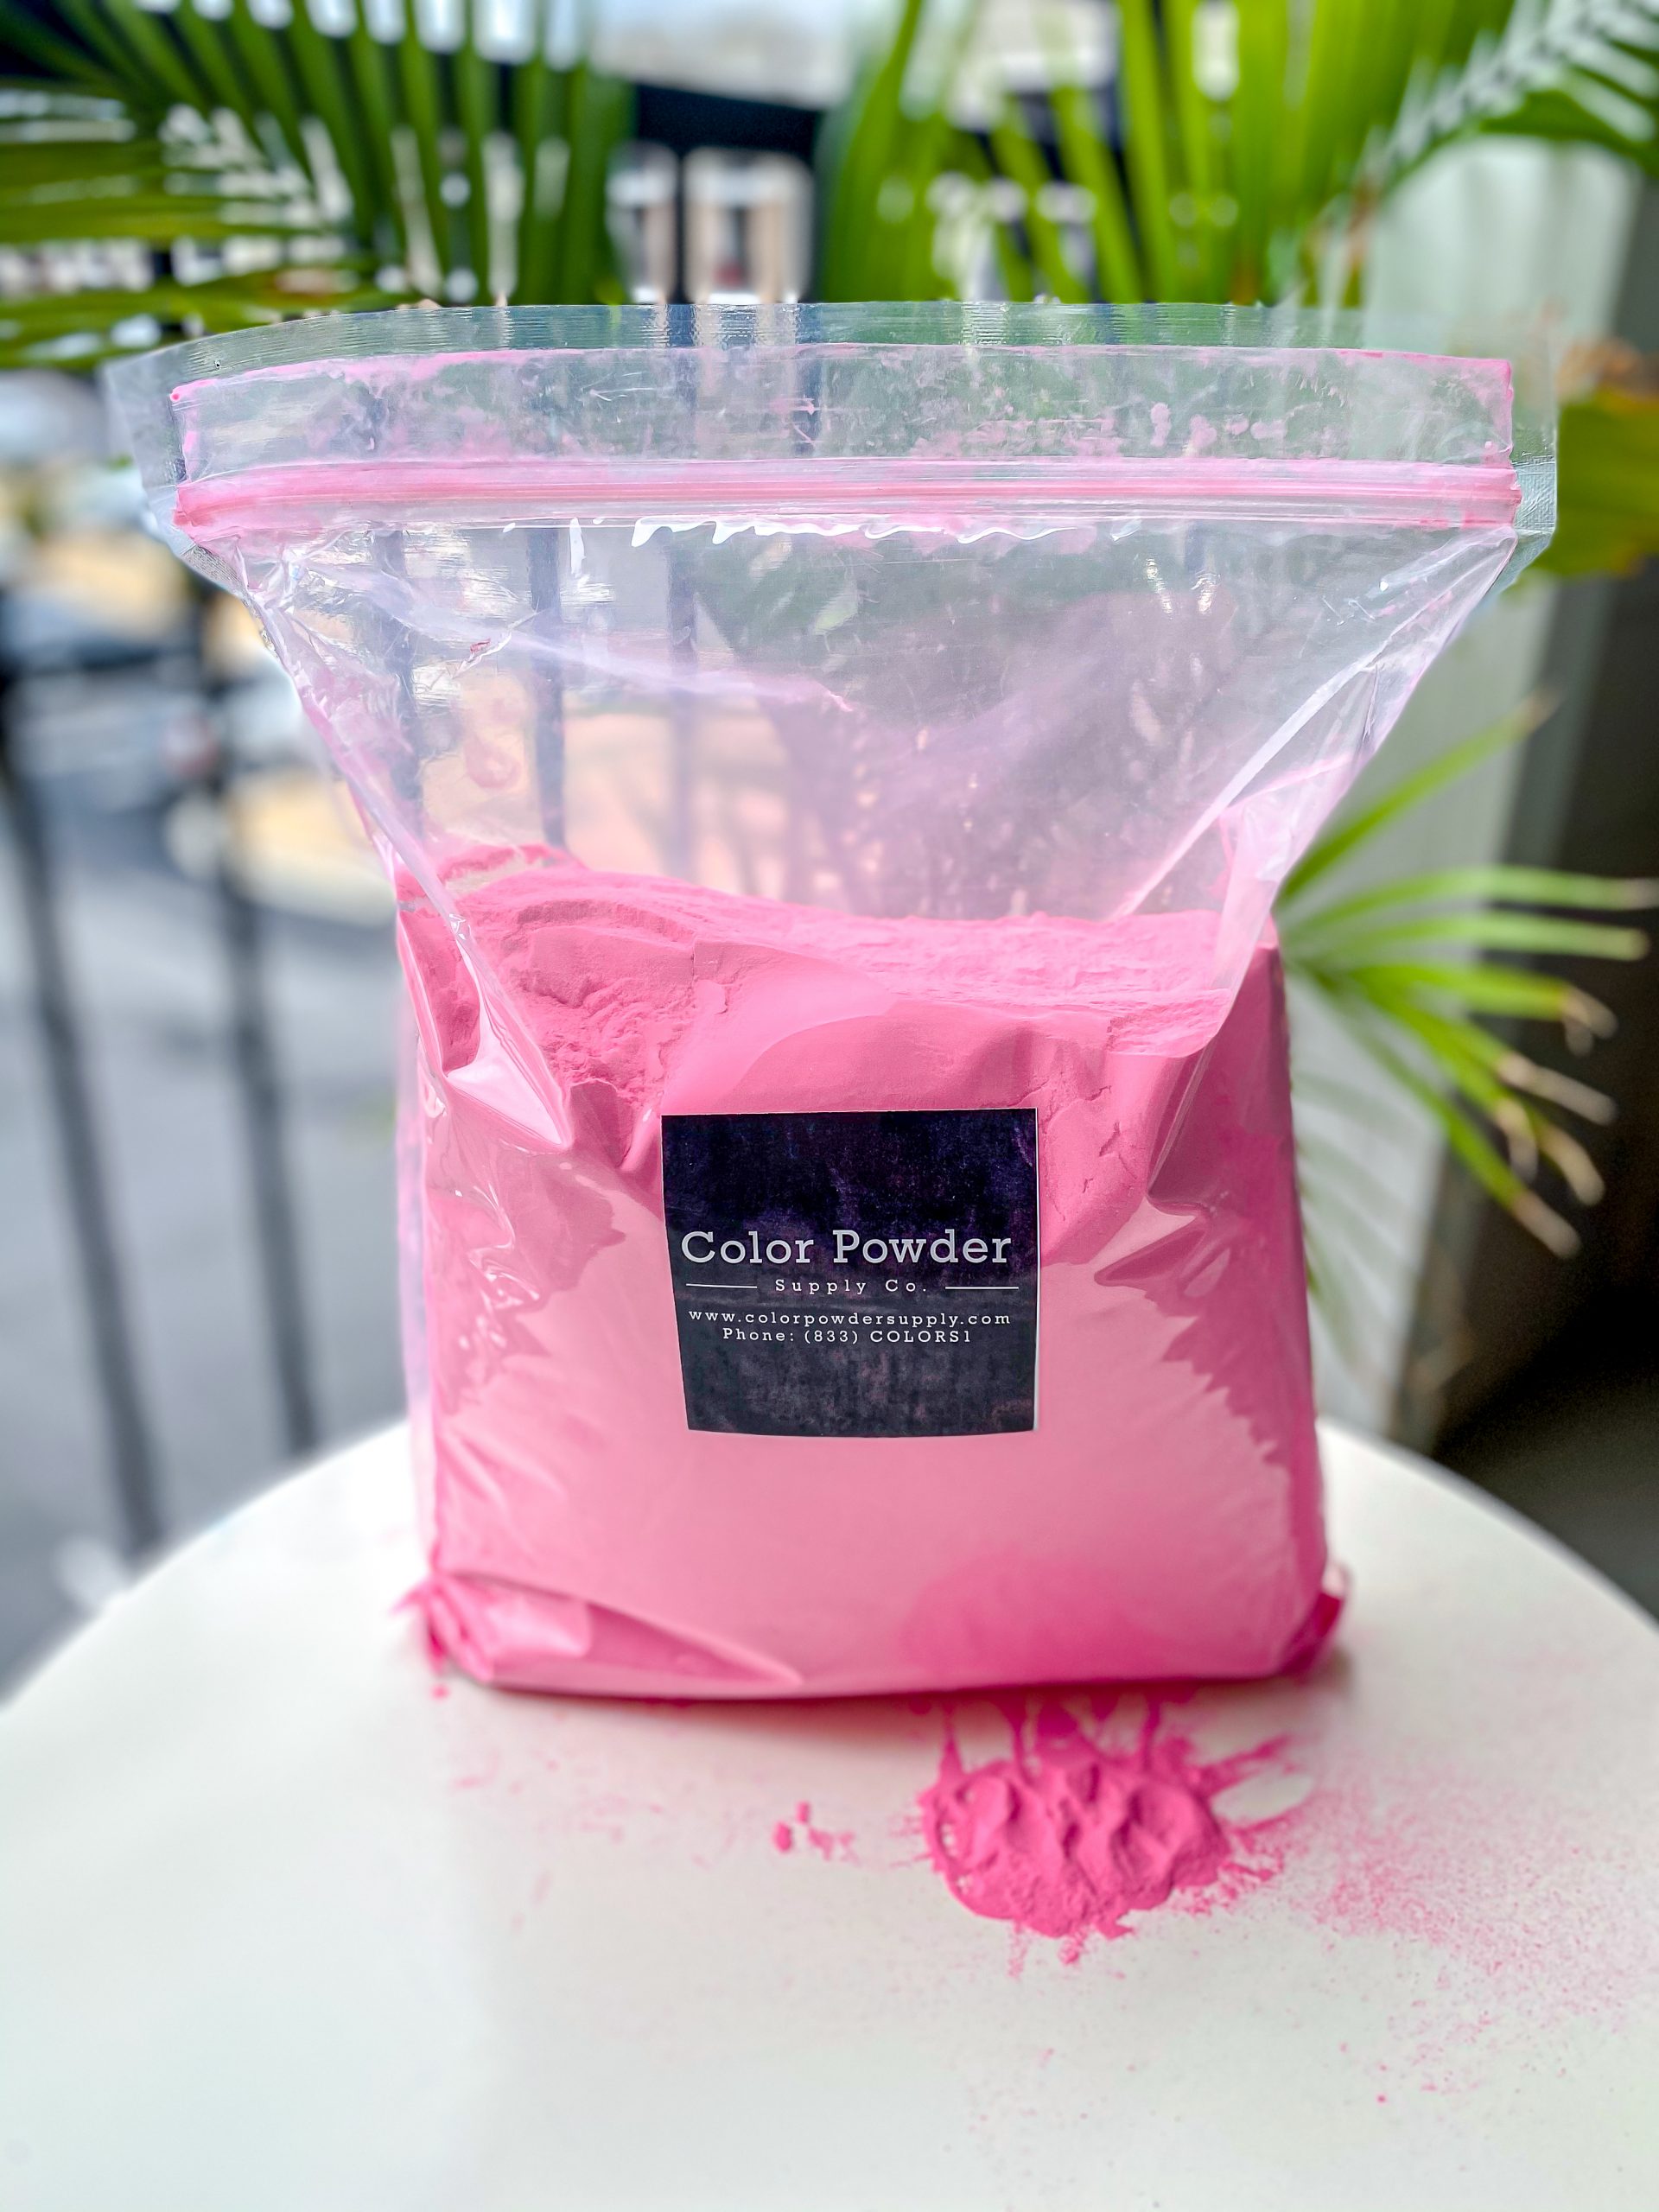 https://www.colorpowdersupply.com/wp-content/uploads/2021/05/pink-gender-reveal-color-powder-scaled.jpg